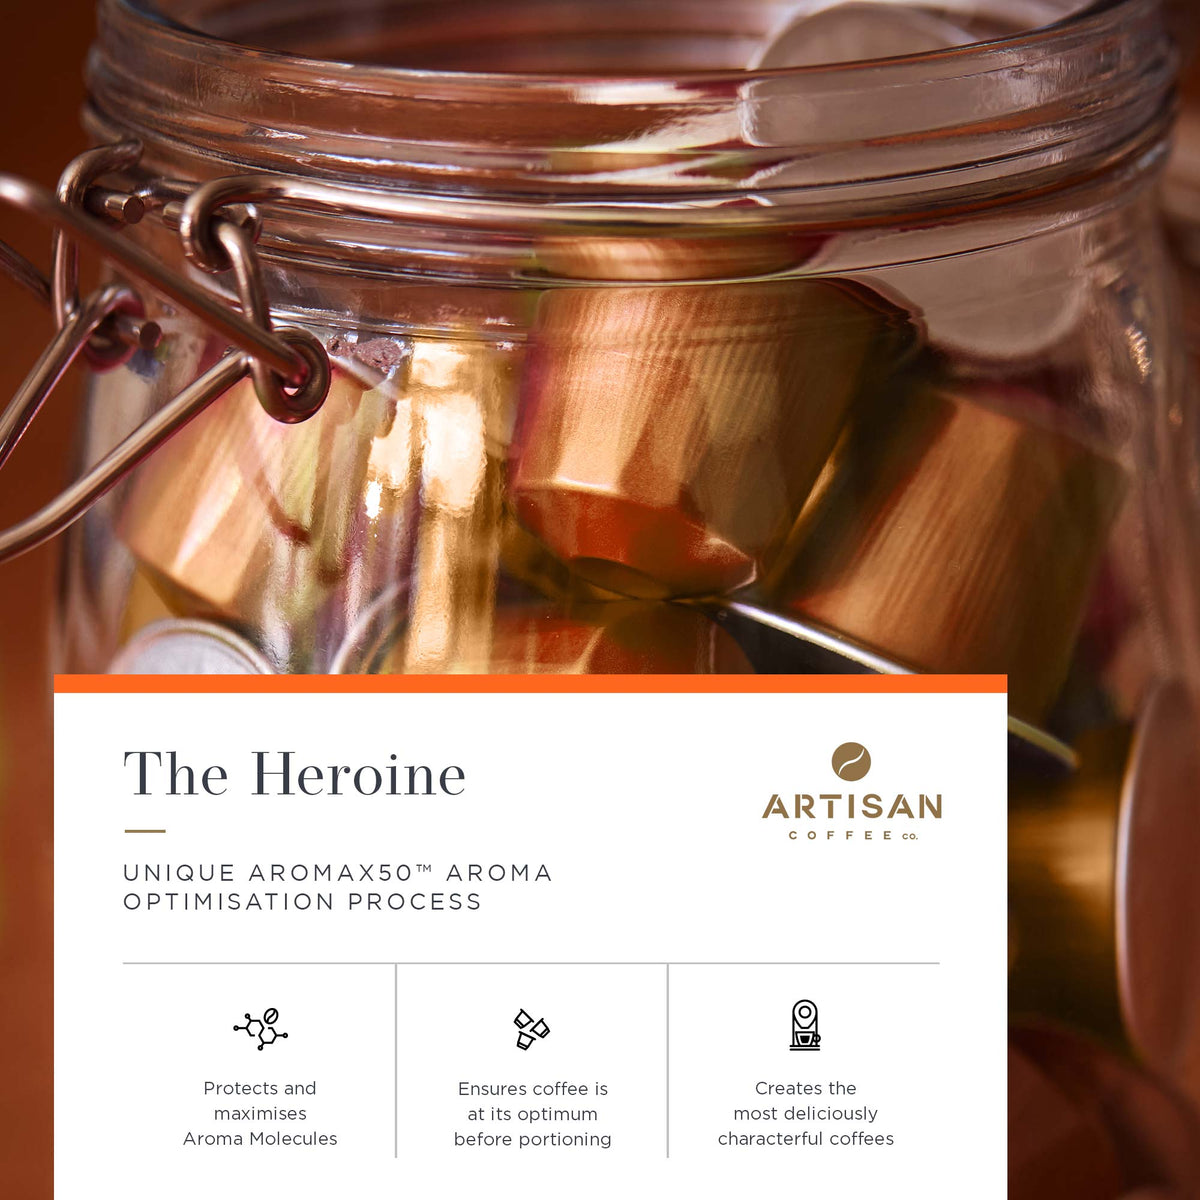 Artisan Coffee Co The Heroine Pods Infographic Aroma